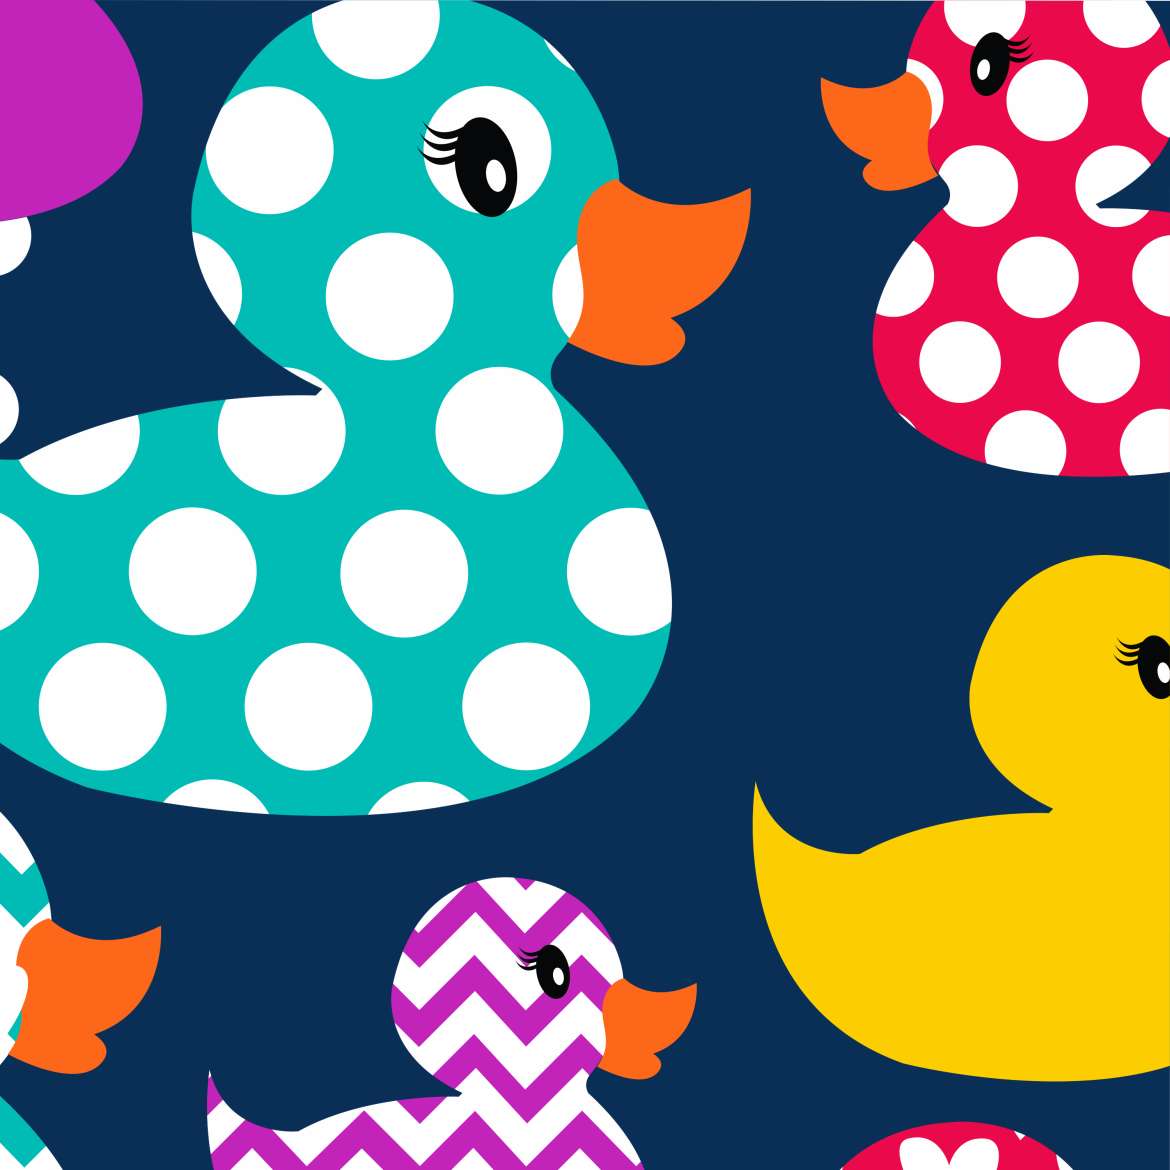 Multi-Colored Rubber Ducks on a Navy Blue Background